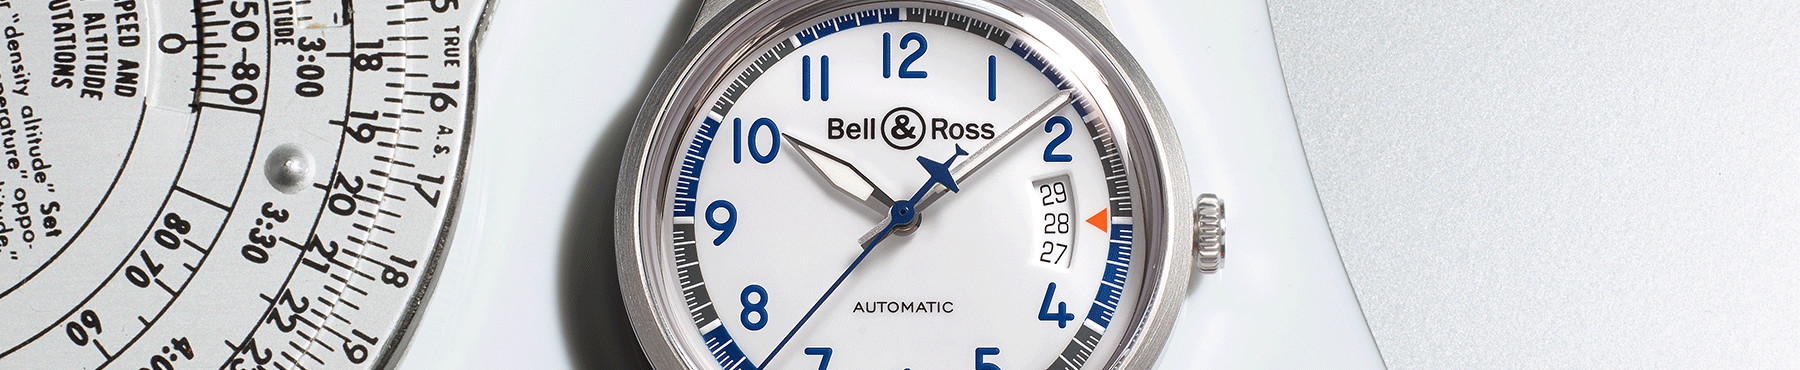 Bell & Ross Vintage Watches